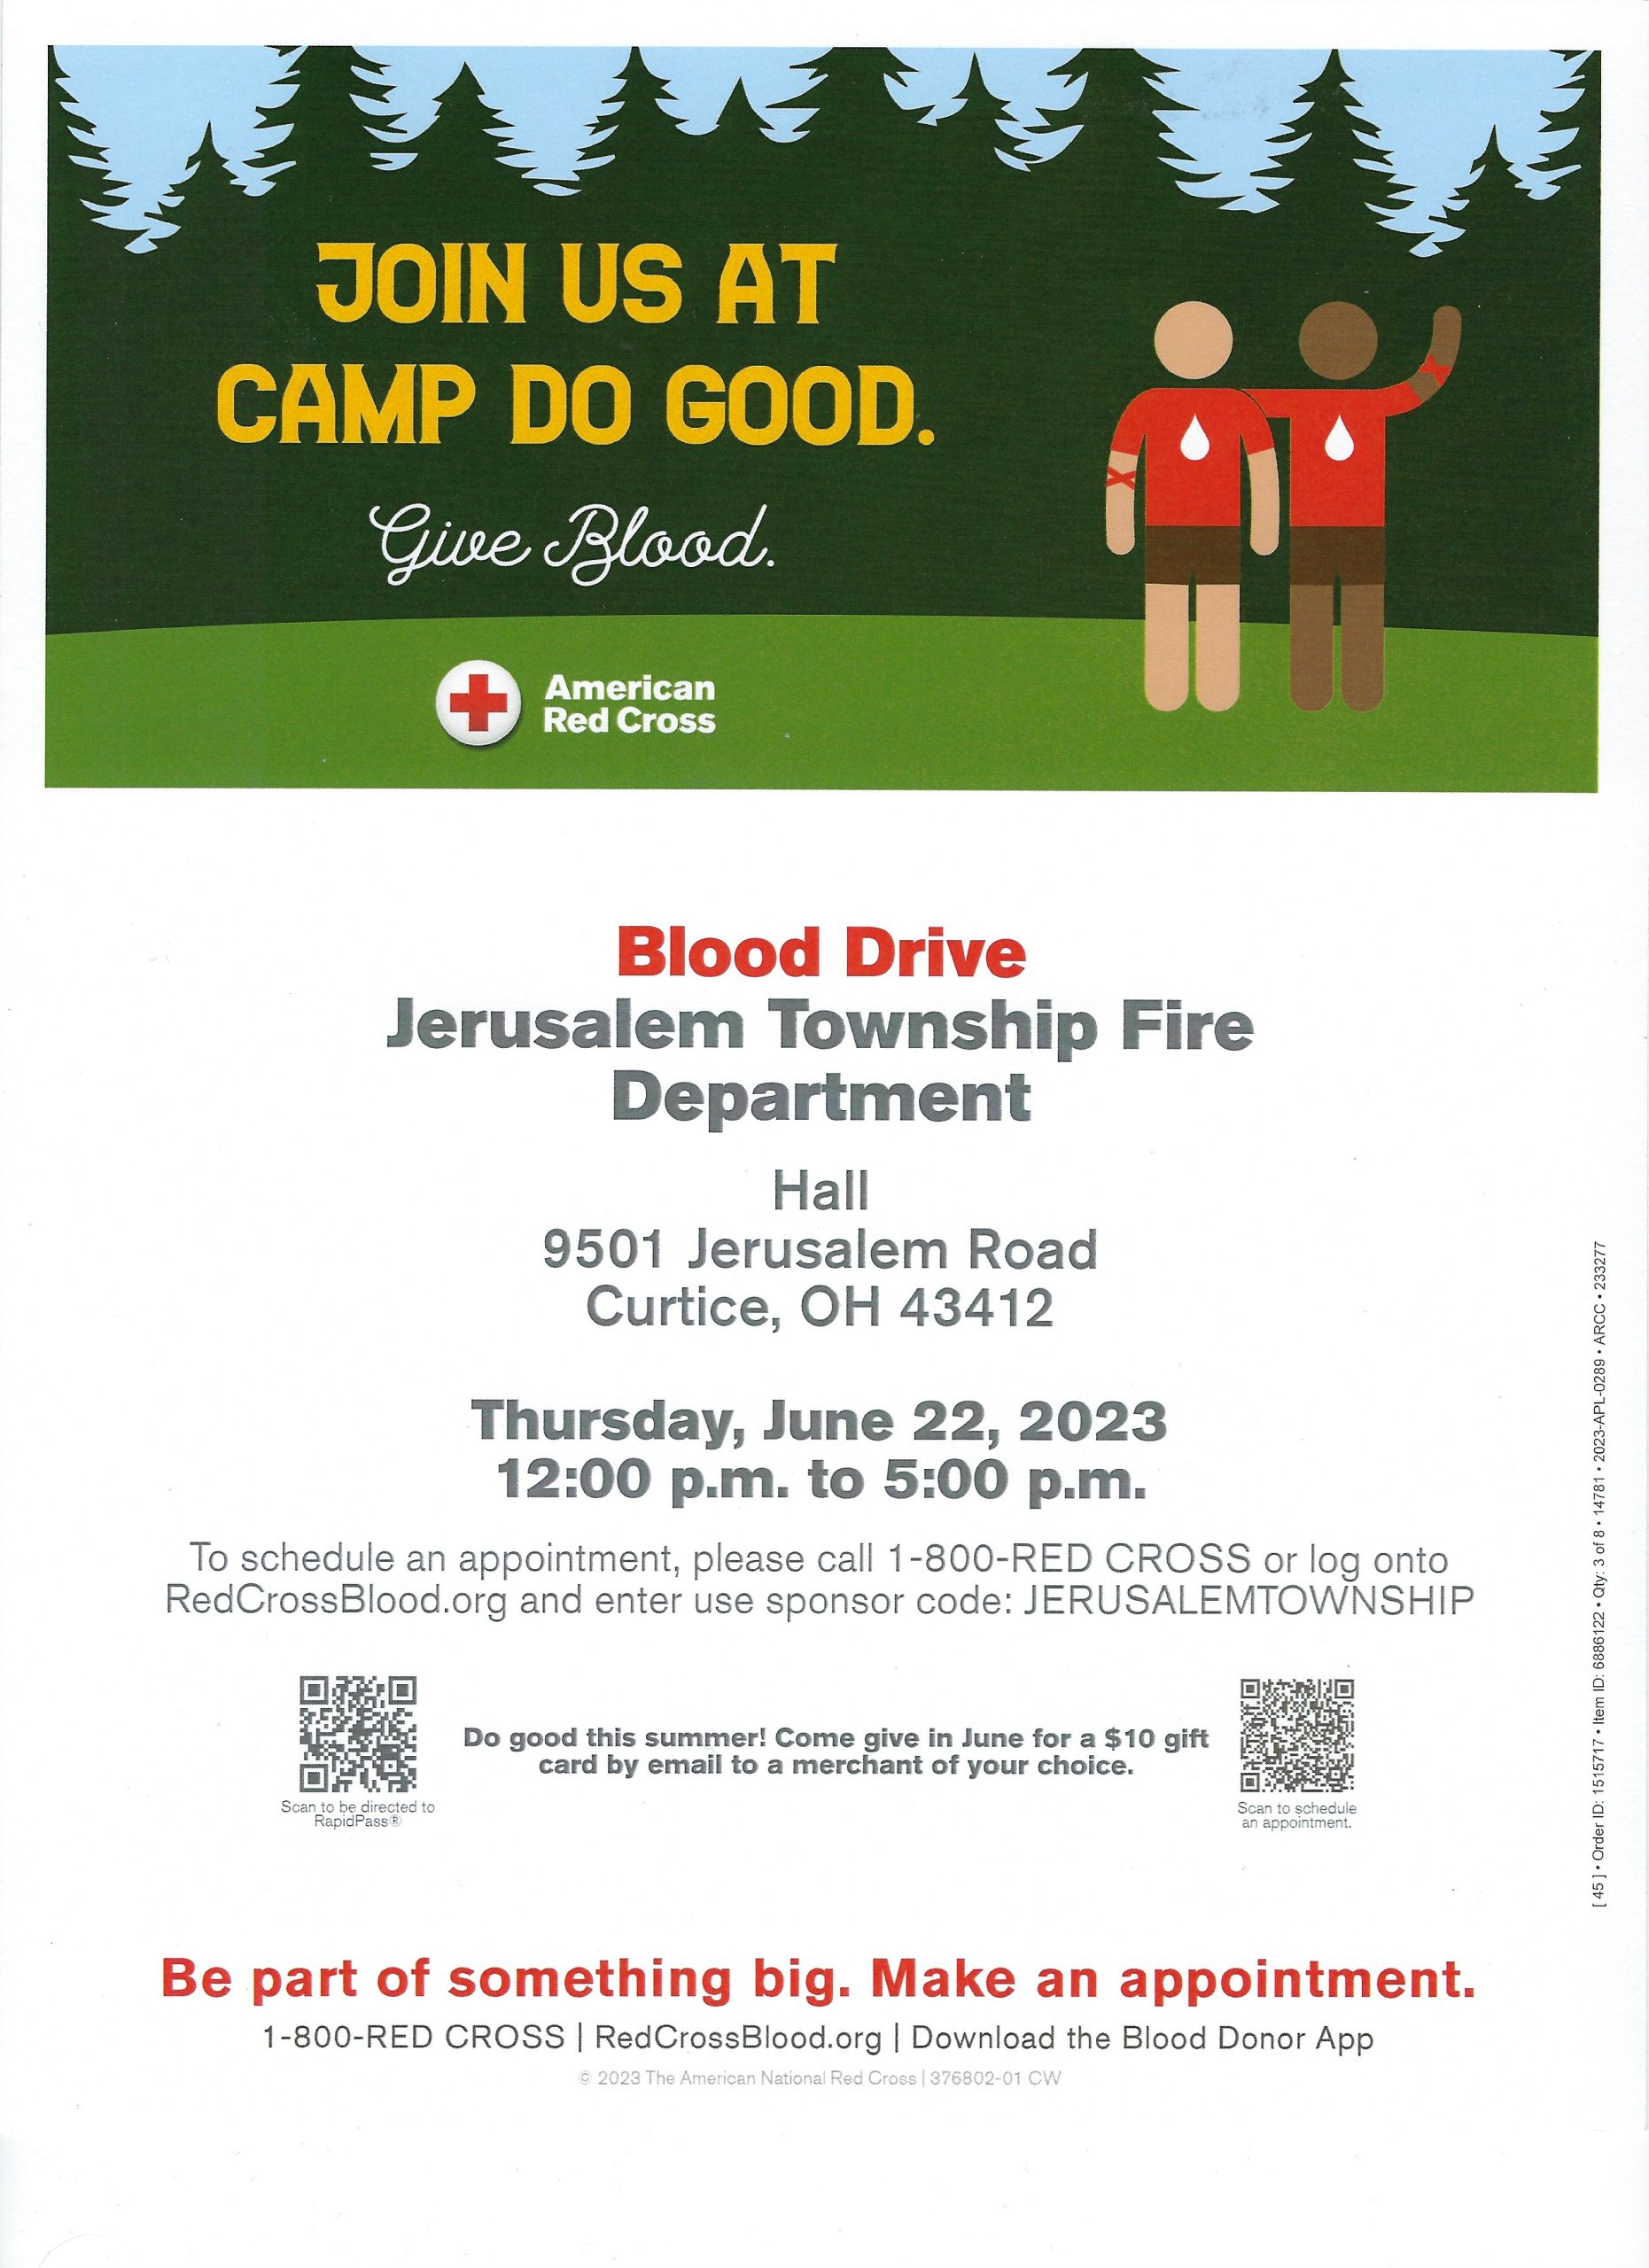 Jerusalem Township Blood Drive Located At The Fire Department 9501 Jerusalem Road Curtice, OH 43412 Thursday, June 22, 2023 12:00 PM to 5:00 PM To Schedule an appointment call 1-800-RED CROSS or Log Into RedCrossBlood.org and use Sponsor Code JERUSALEMTOWNSHIP